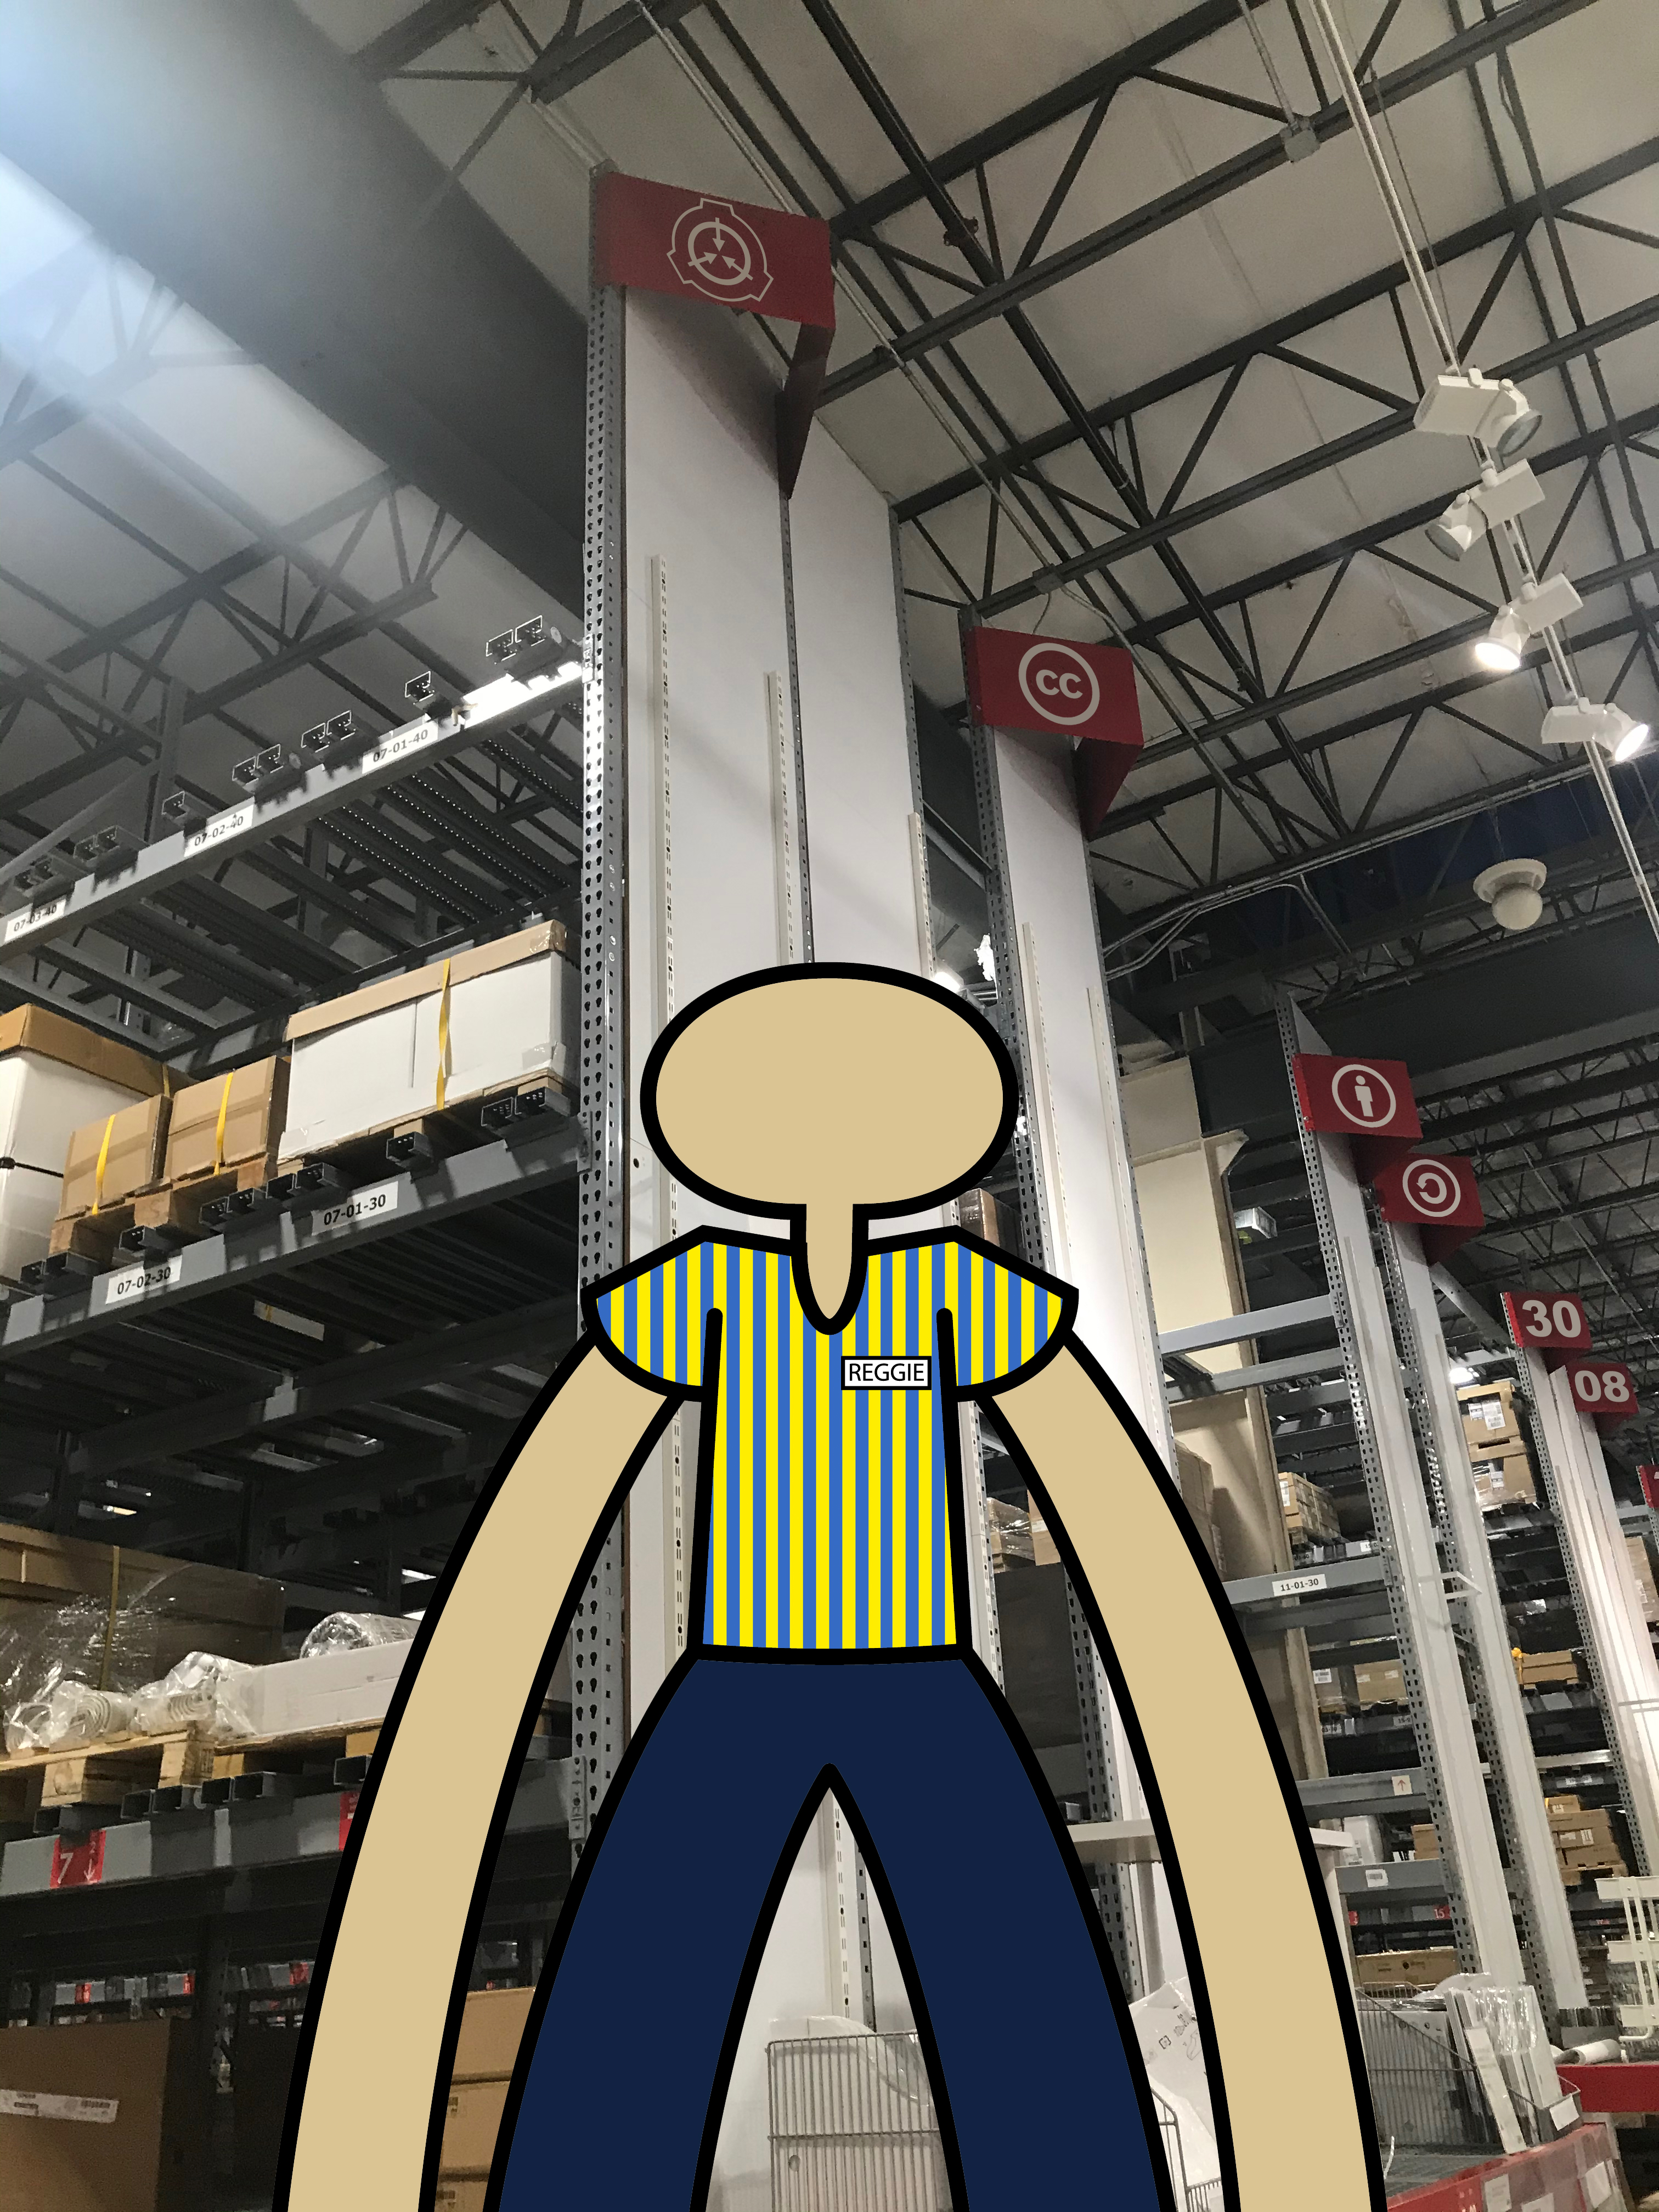 SCP IKEA STAIRWAY to HEAVEN.. (SCP-3008)